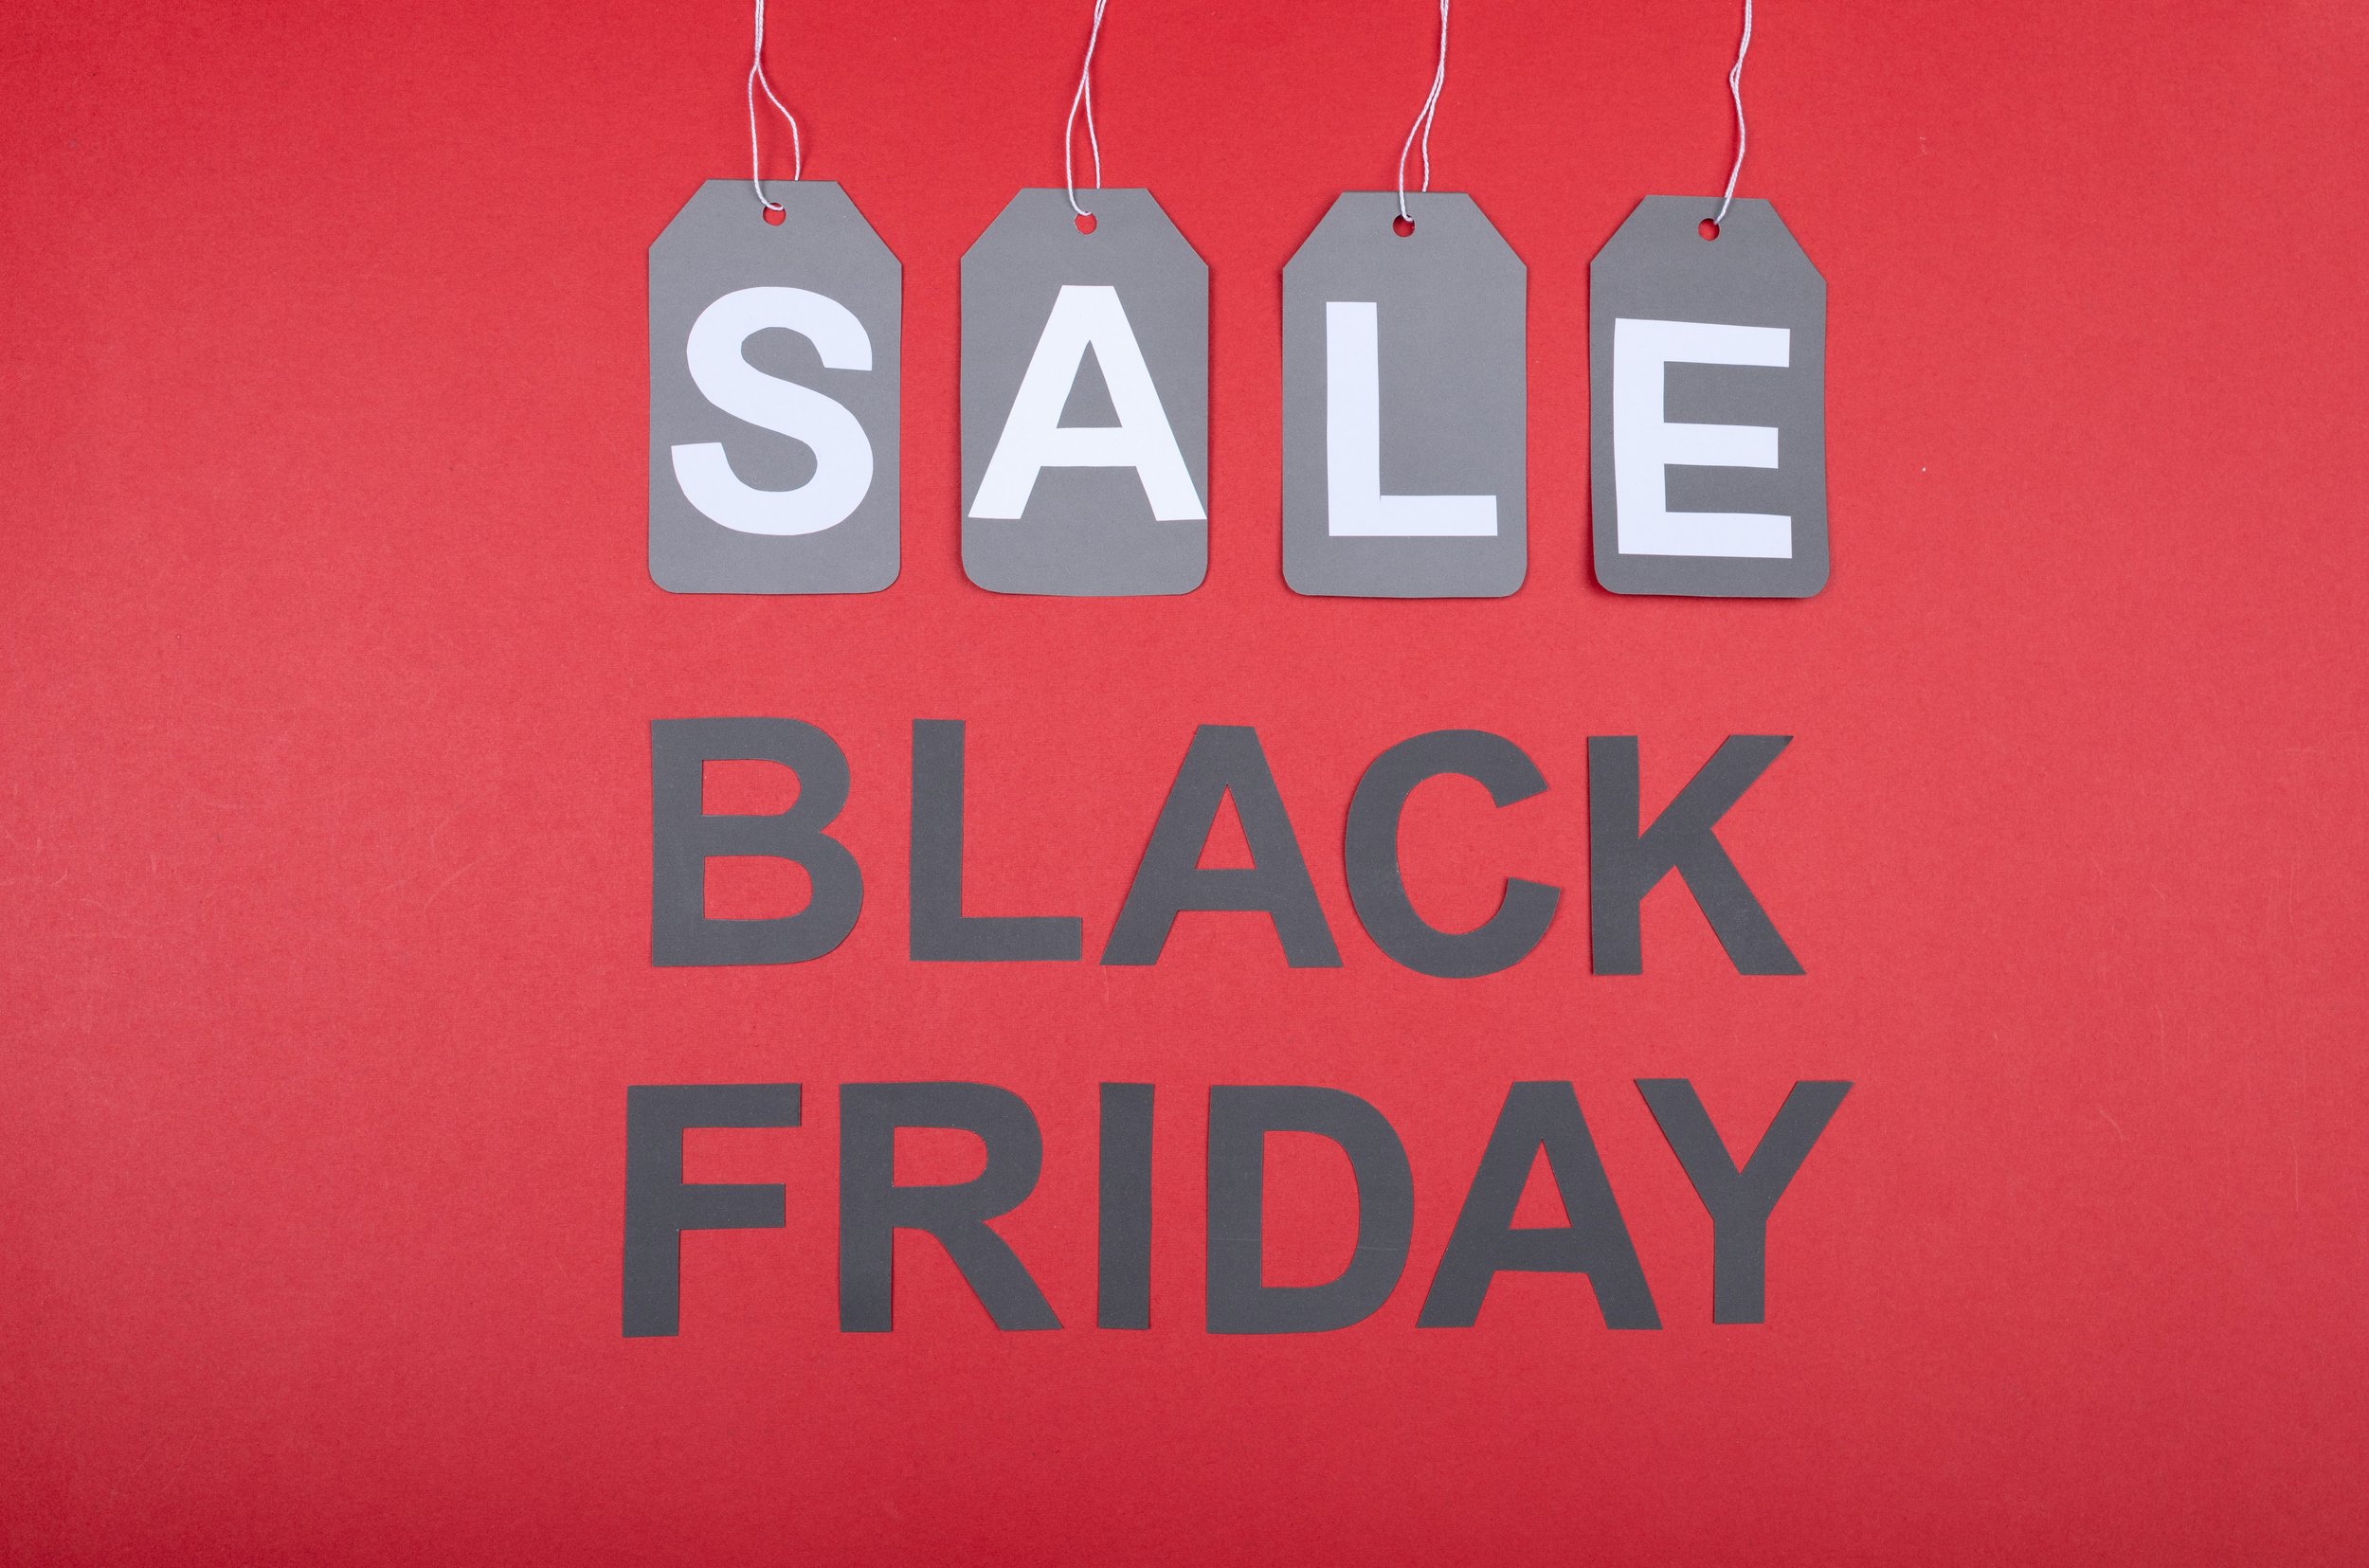 Black Friday: How to cash in as an event planner